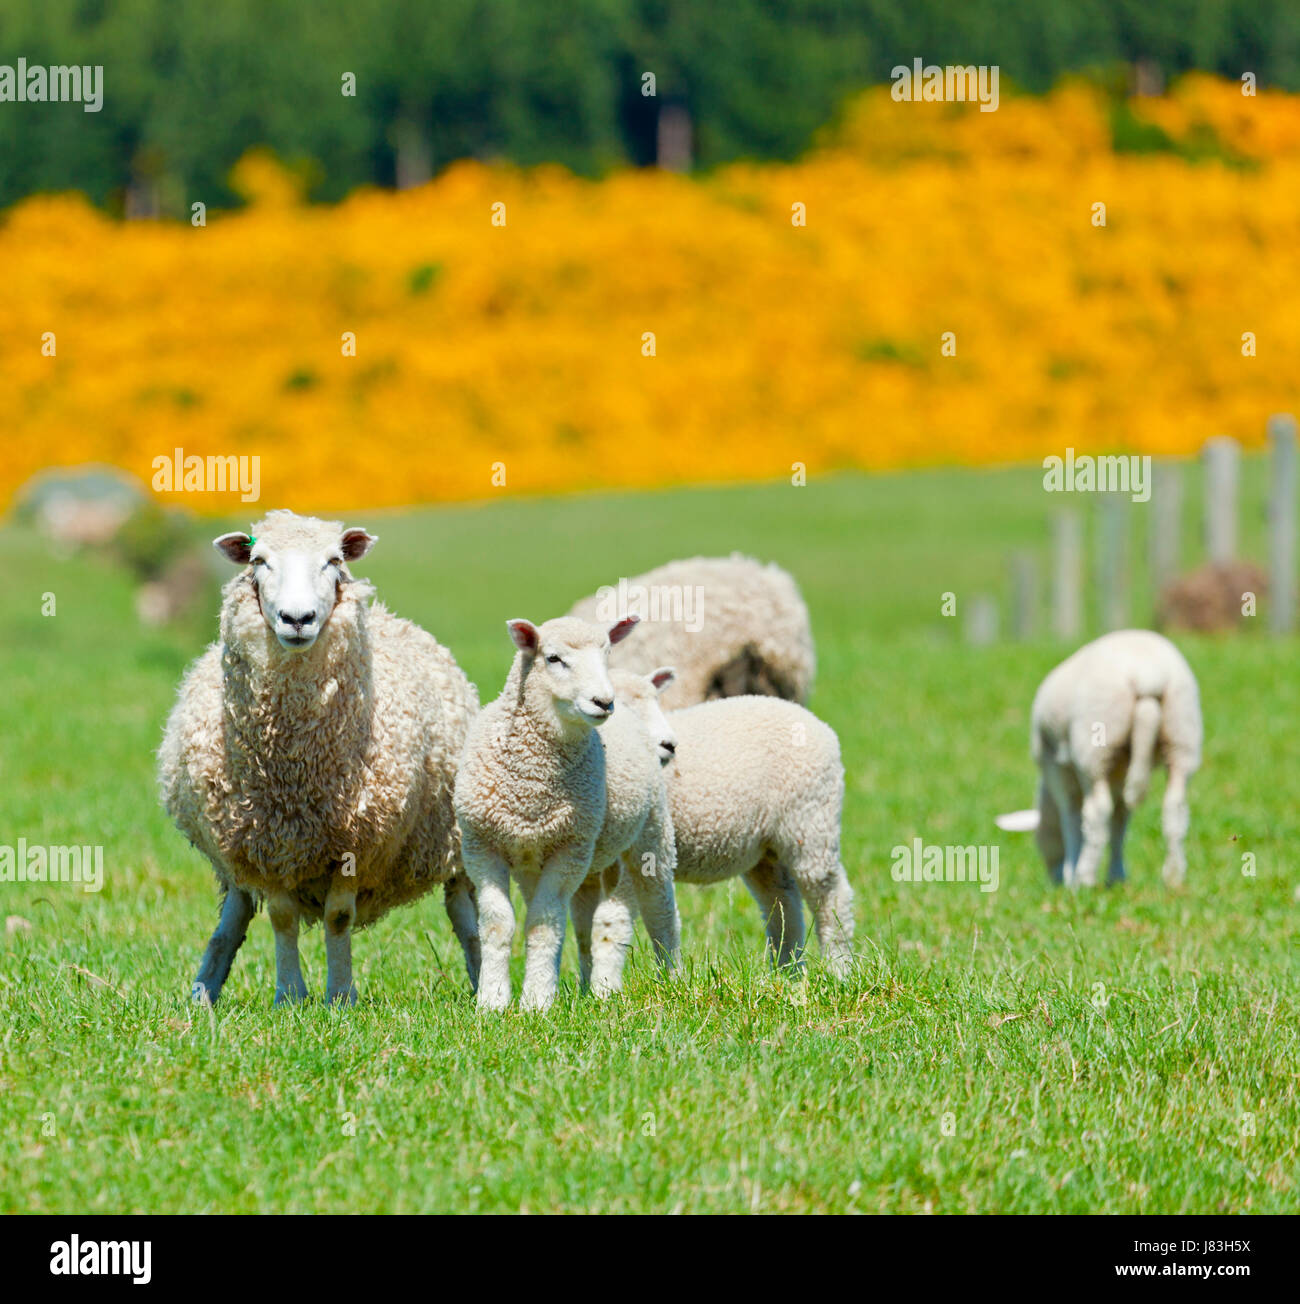 animal agriculture farming sheep farm pasture meadow grass lawn green lamb hill Stock Photo